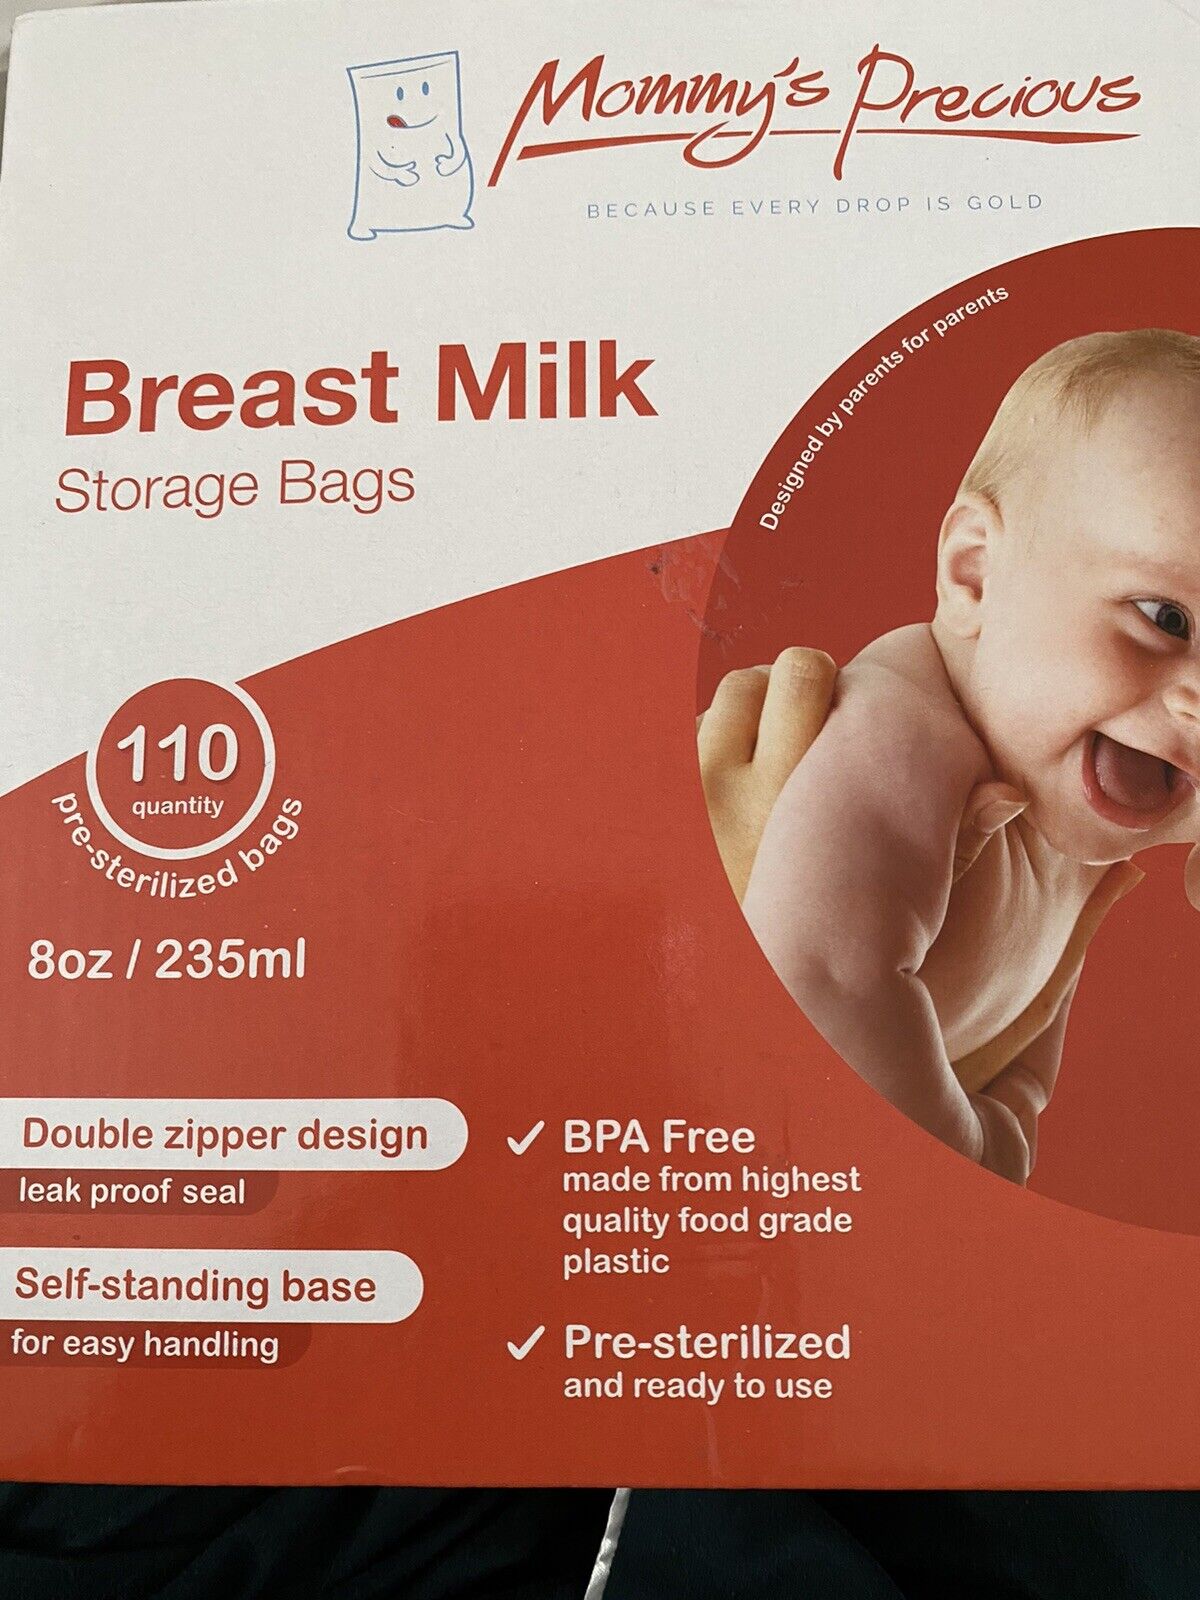 Mommy’s Precious Breast Milk Storage Bags 45pcs. Only 45pcs Unused Bags